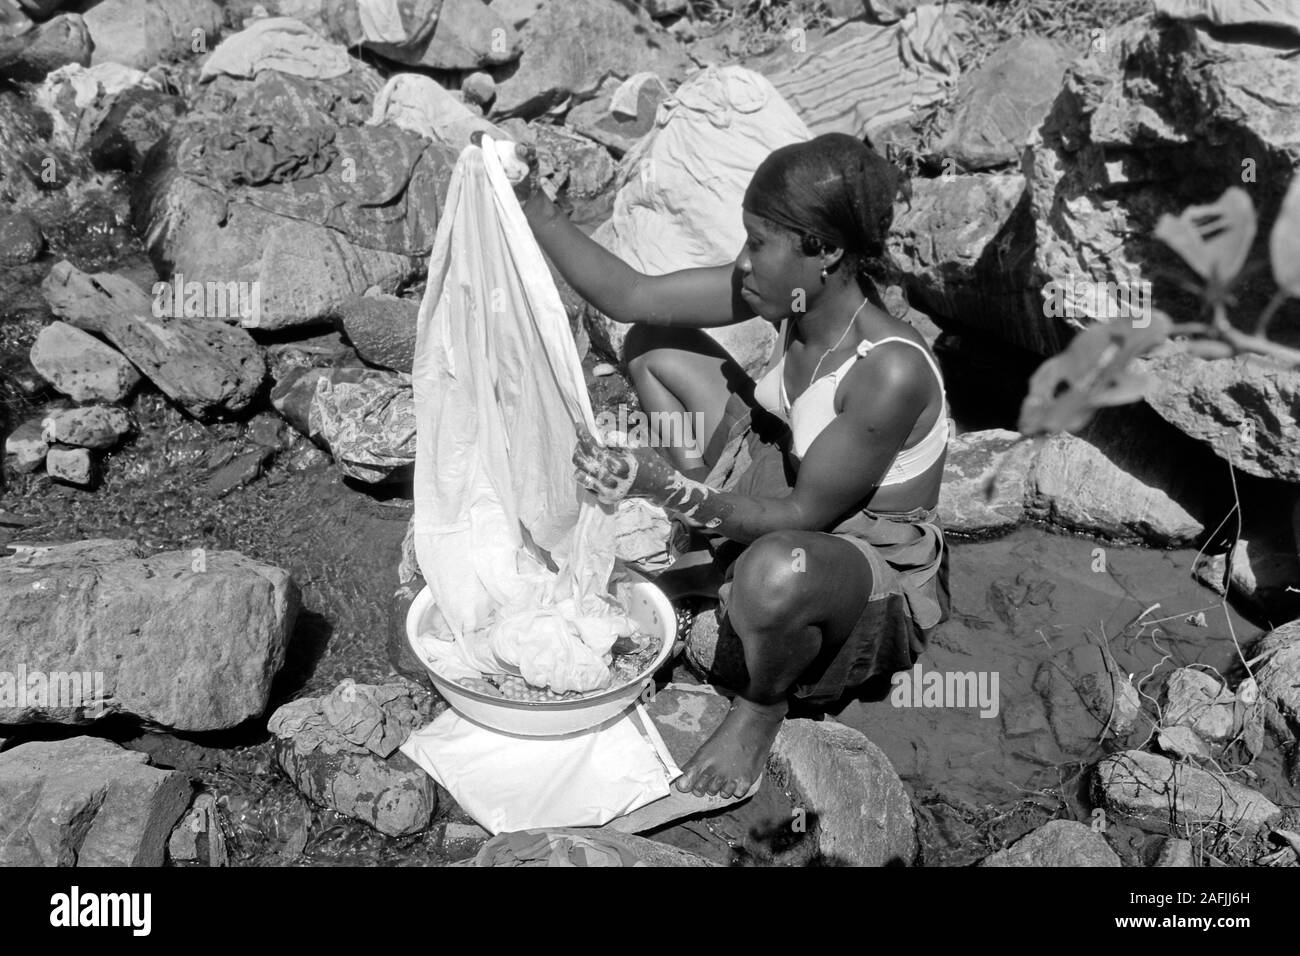 Waschtag am Fluss, 1967. Laundry day by the river, 1967. Stock Photo